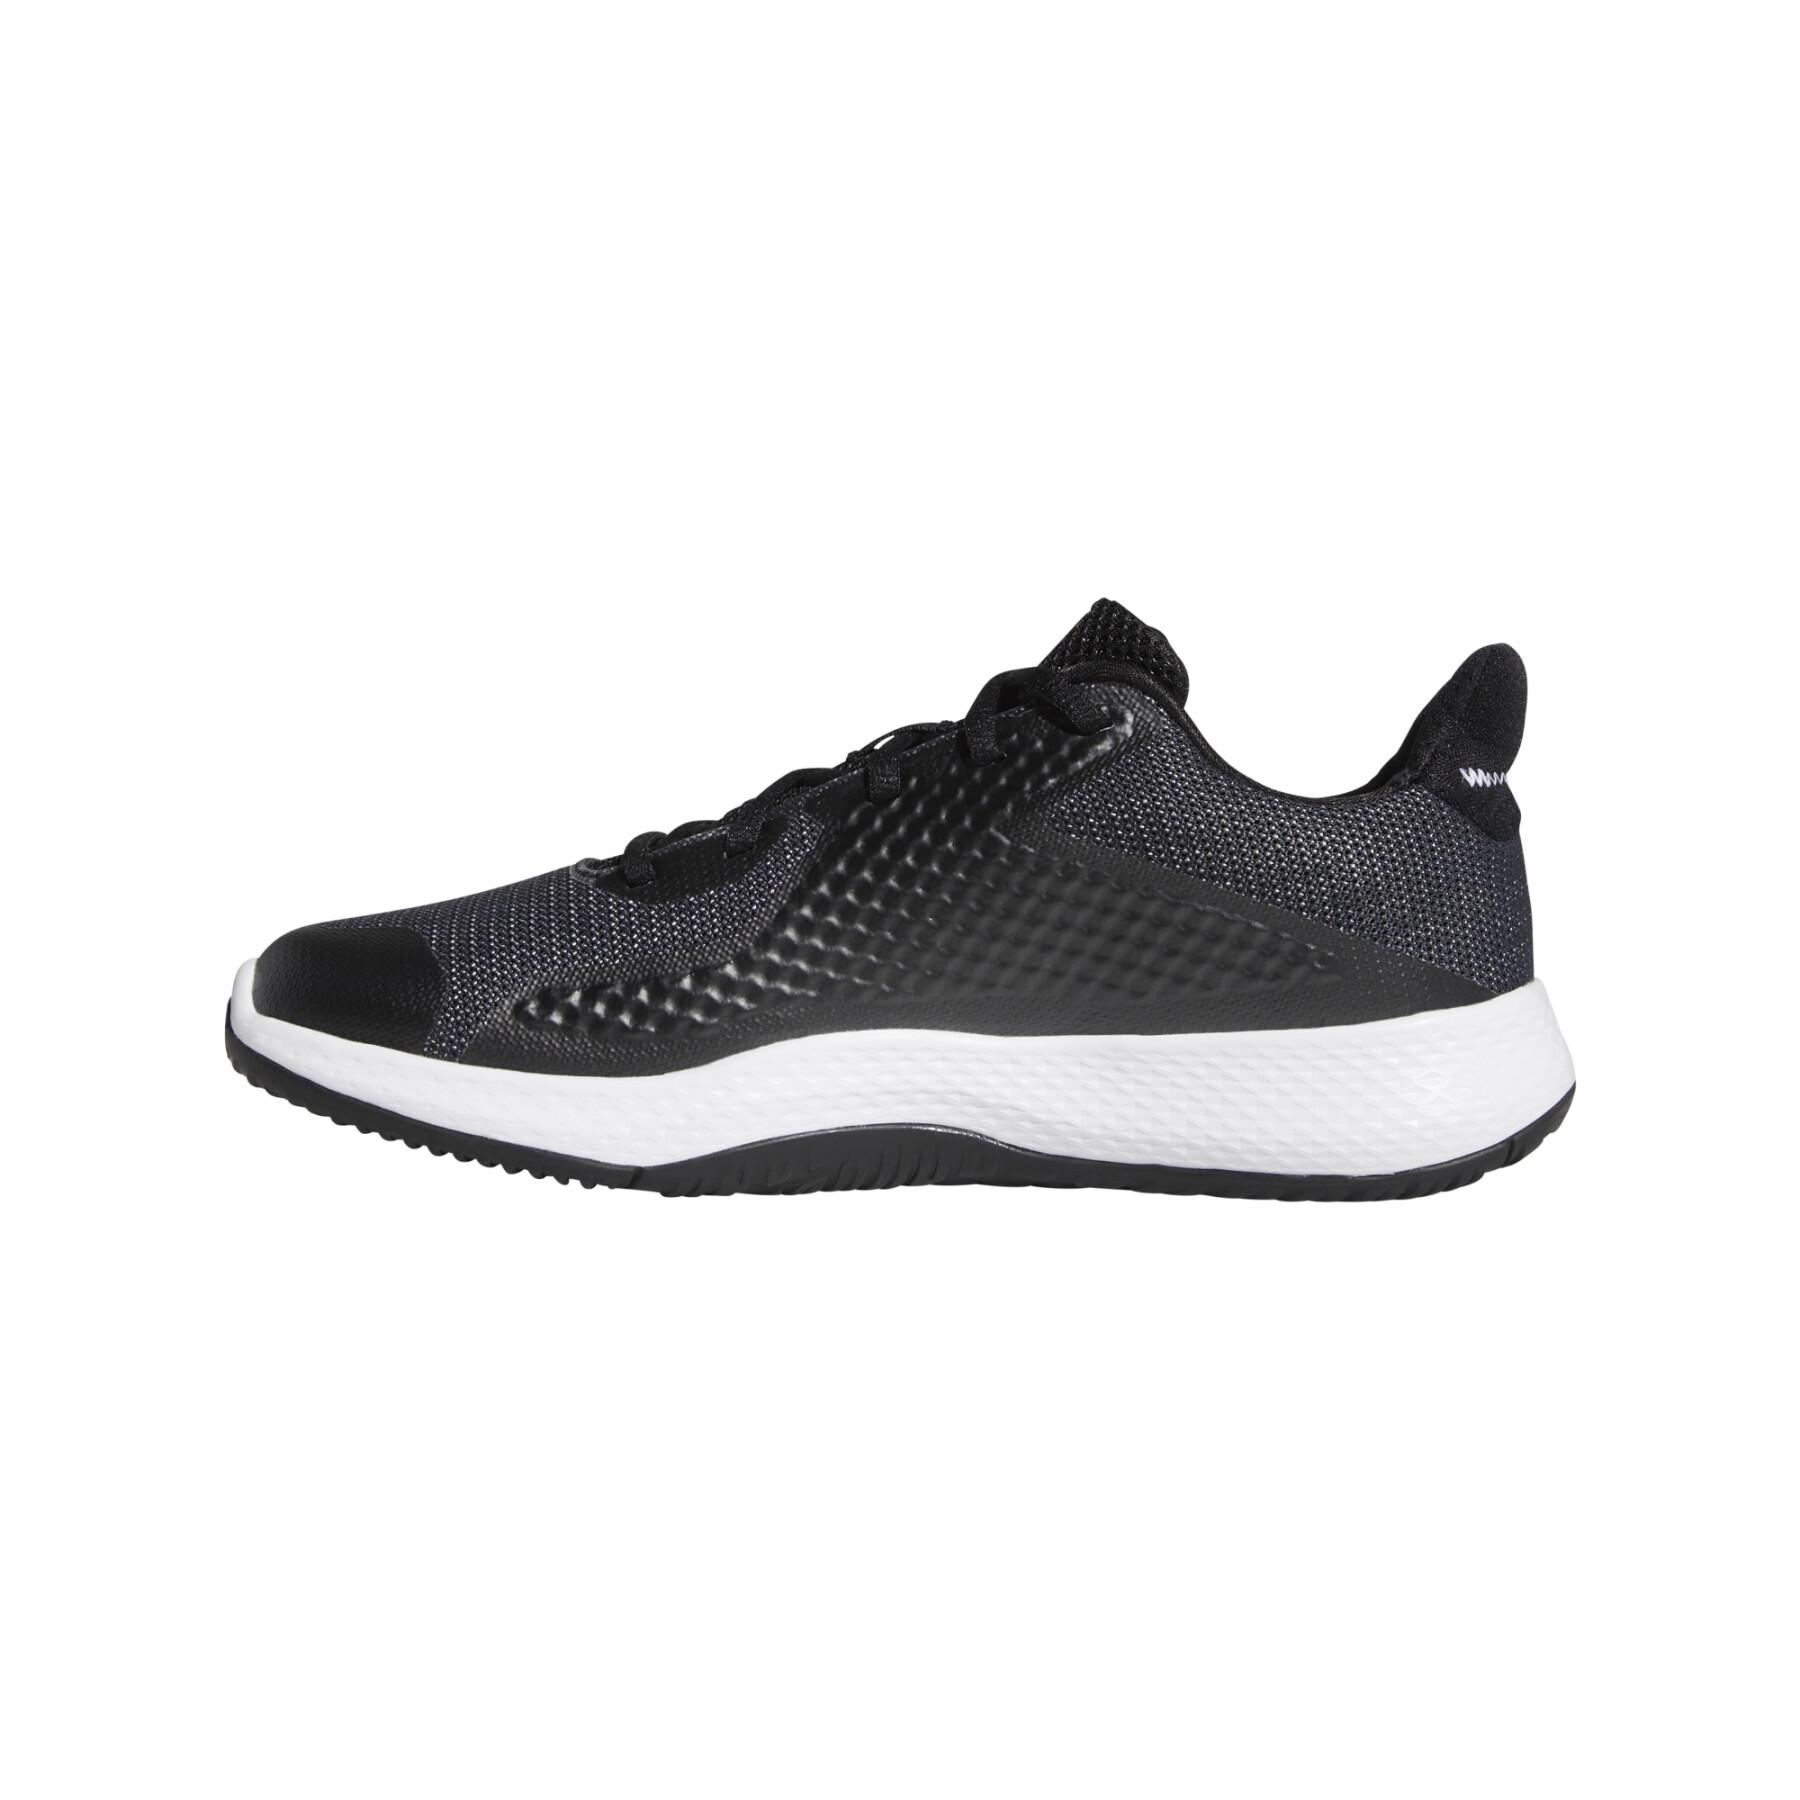 Chaussures femme adidas FitBounce Trainers